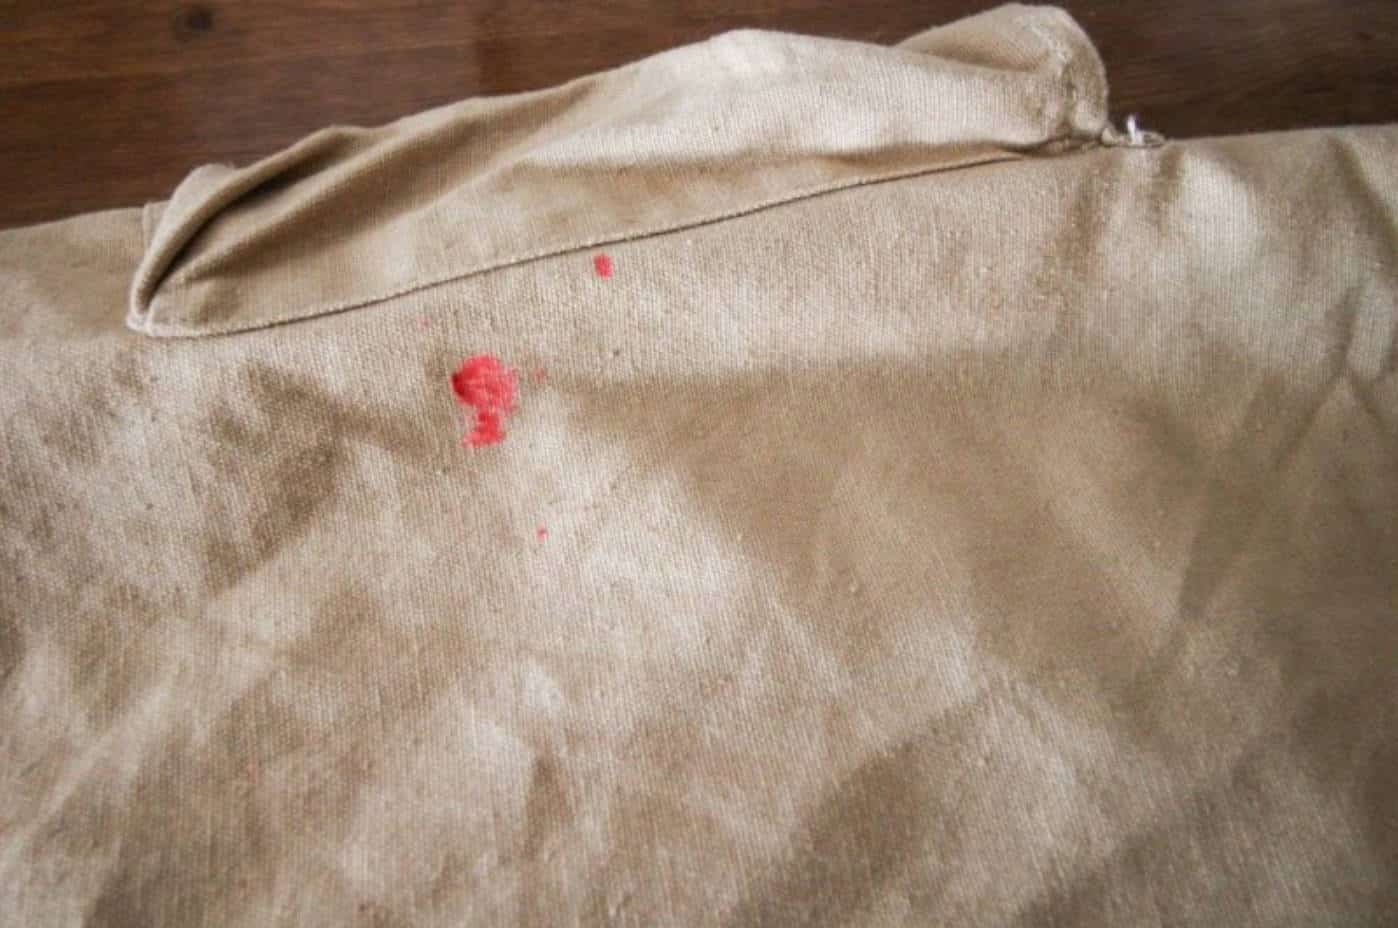 2 Things to Know Before Removing Playdough from your Clothes